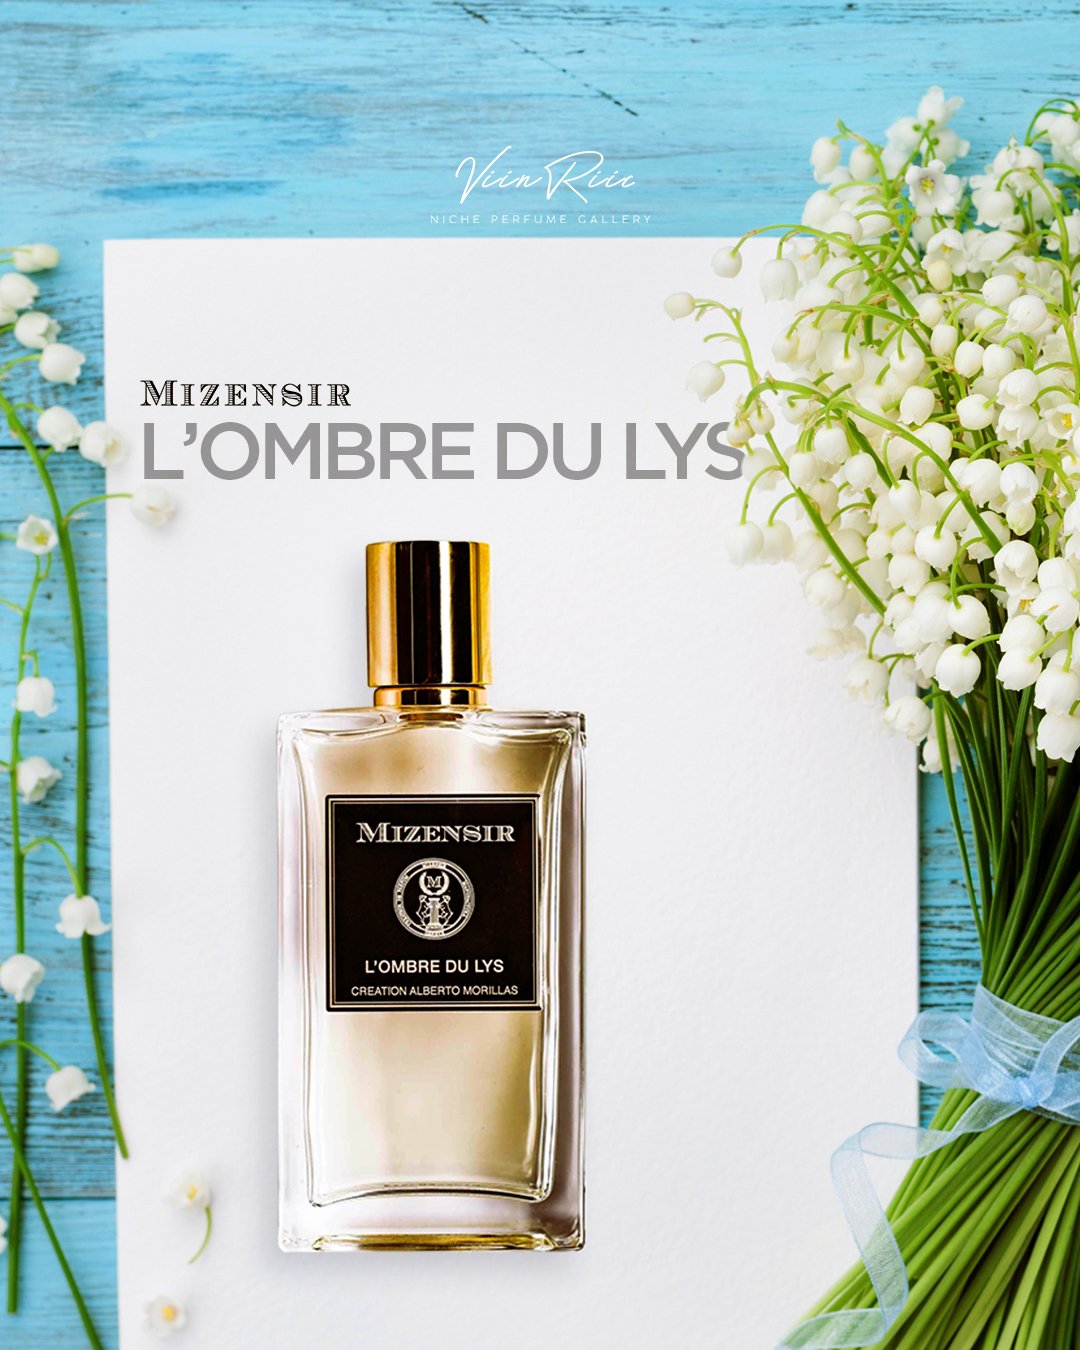 Mizensir's L'Ombre Du Lys is perhaps the newest scent of luck creation